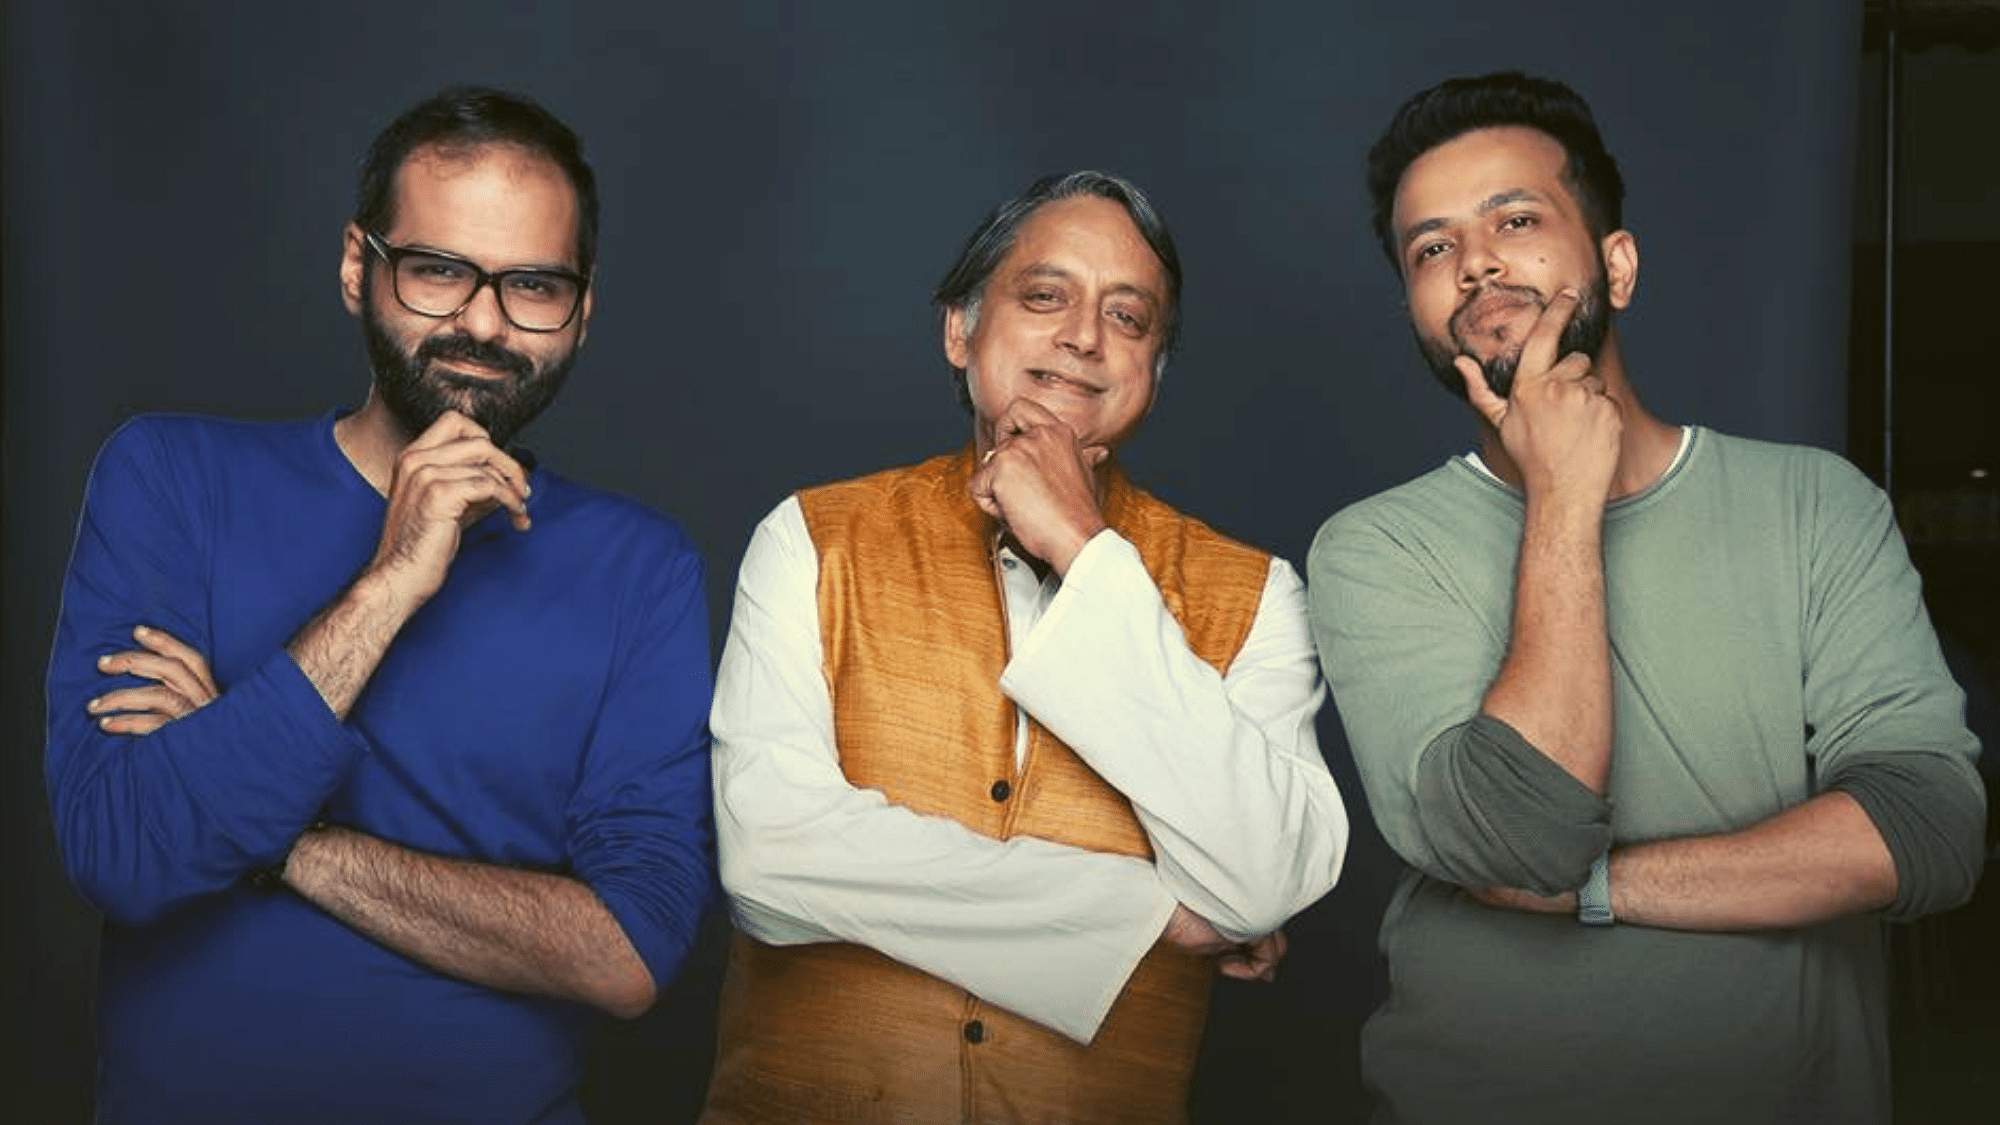 Kunal Kamra mentors Shashi Tharoor on ‘One Mic Stand’, a show hosted by Sapan Verma.